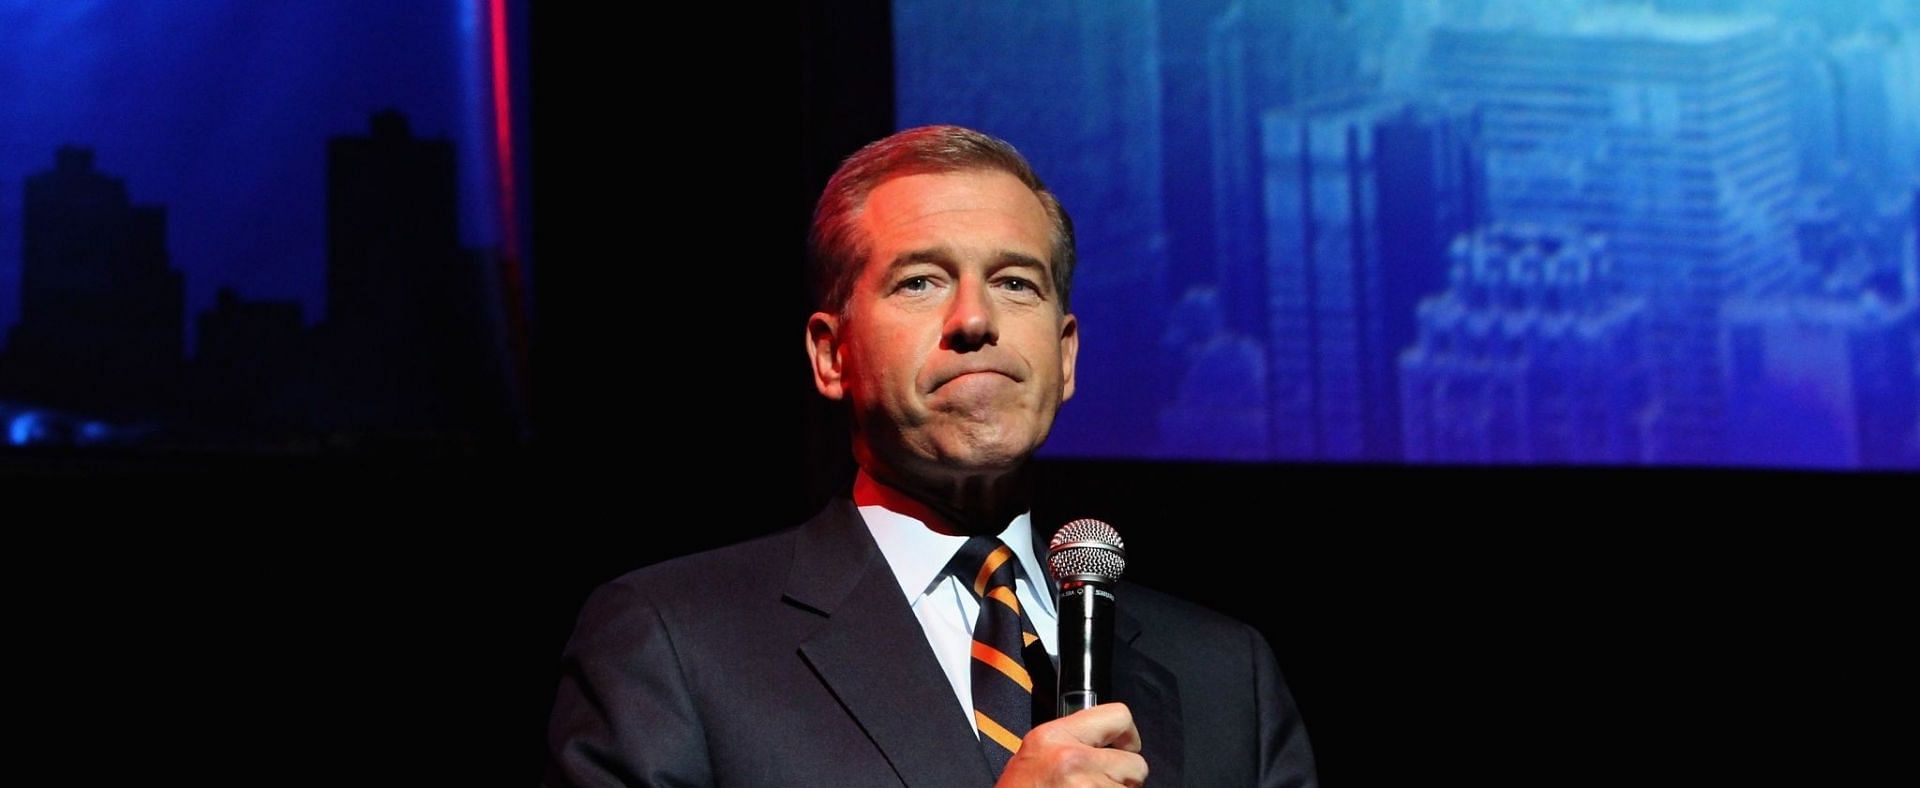 Brian Williams&#039; MSNBC journey came to an end on December 9 (Image via Monica Schipper/Getty Images)